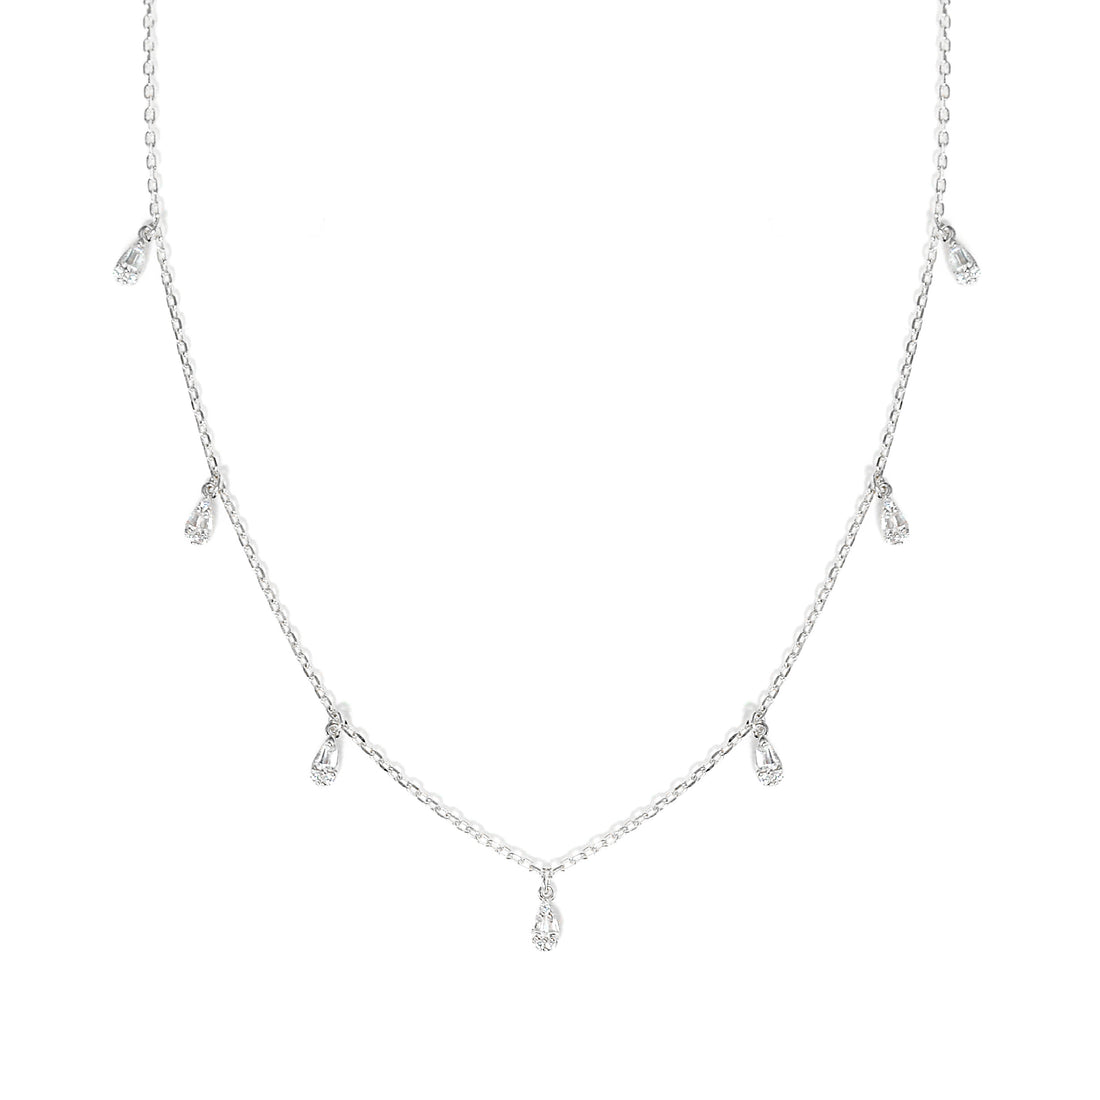 Dolce Mondo Silver 925 Charm Necklace with High Quality Cubic Zircons - Elegant Necklace for Her